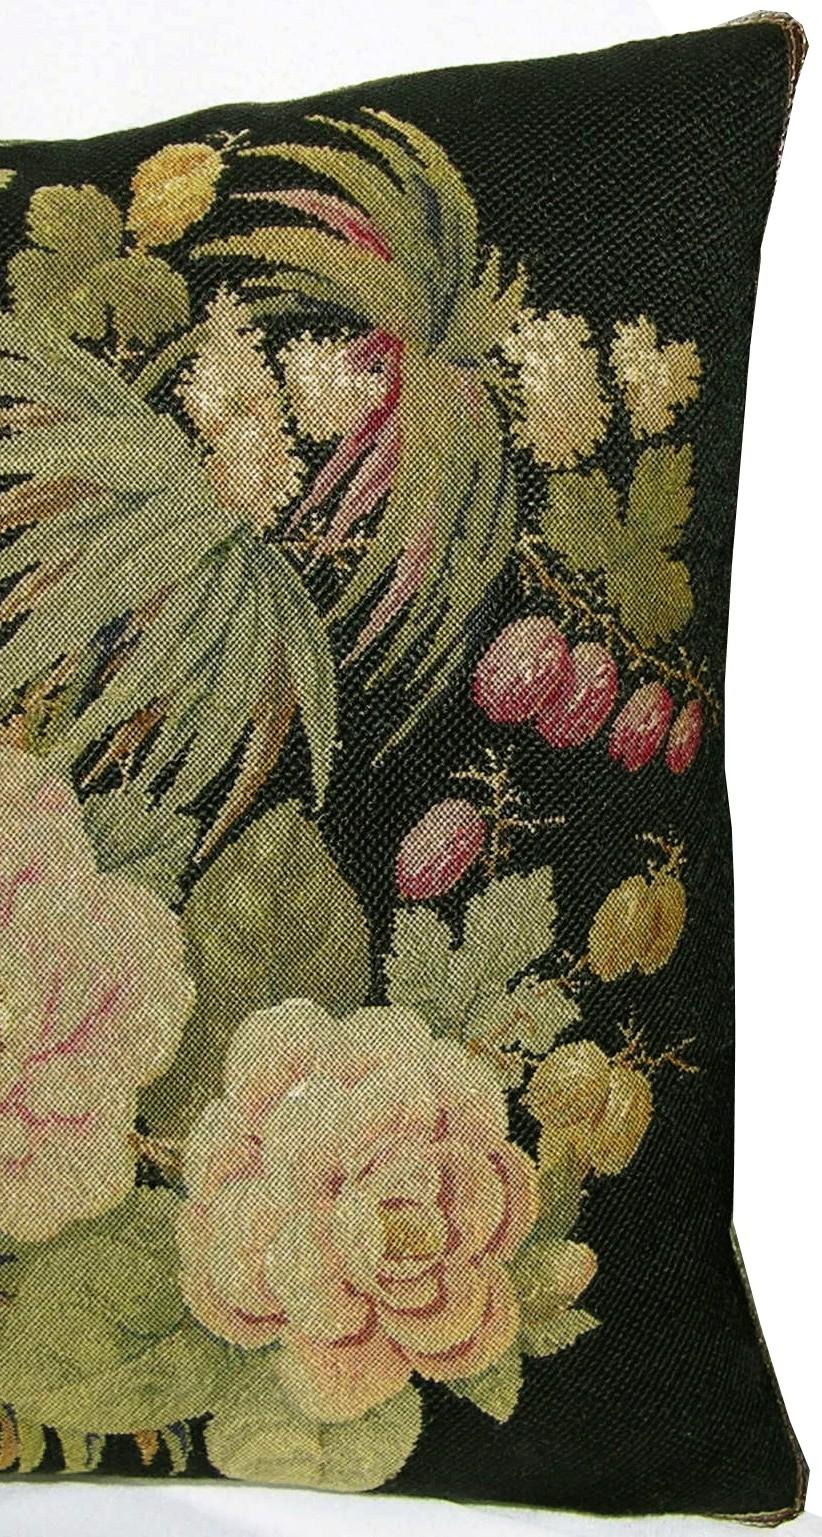 Empire Circa 1880 Antique French Needlepoint Pillow For Sale